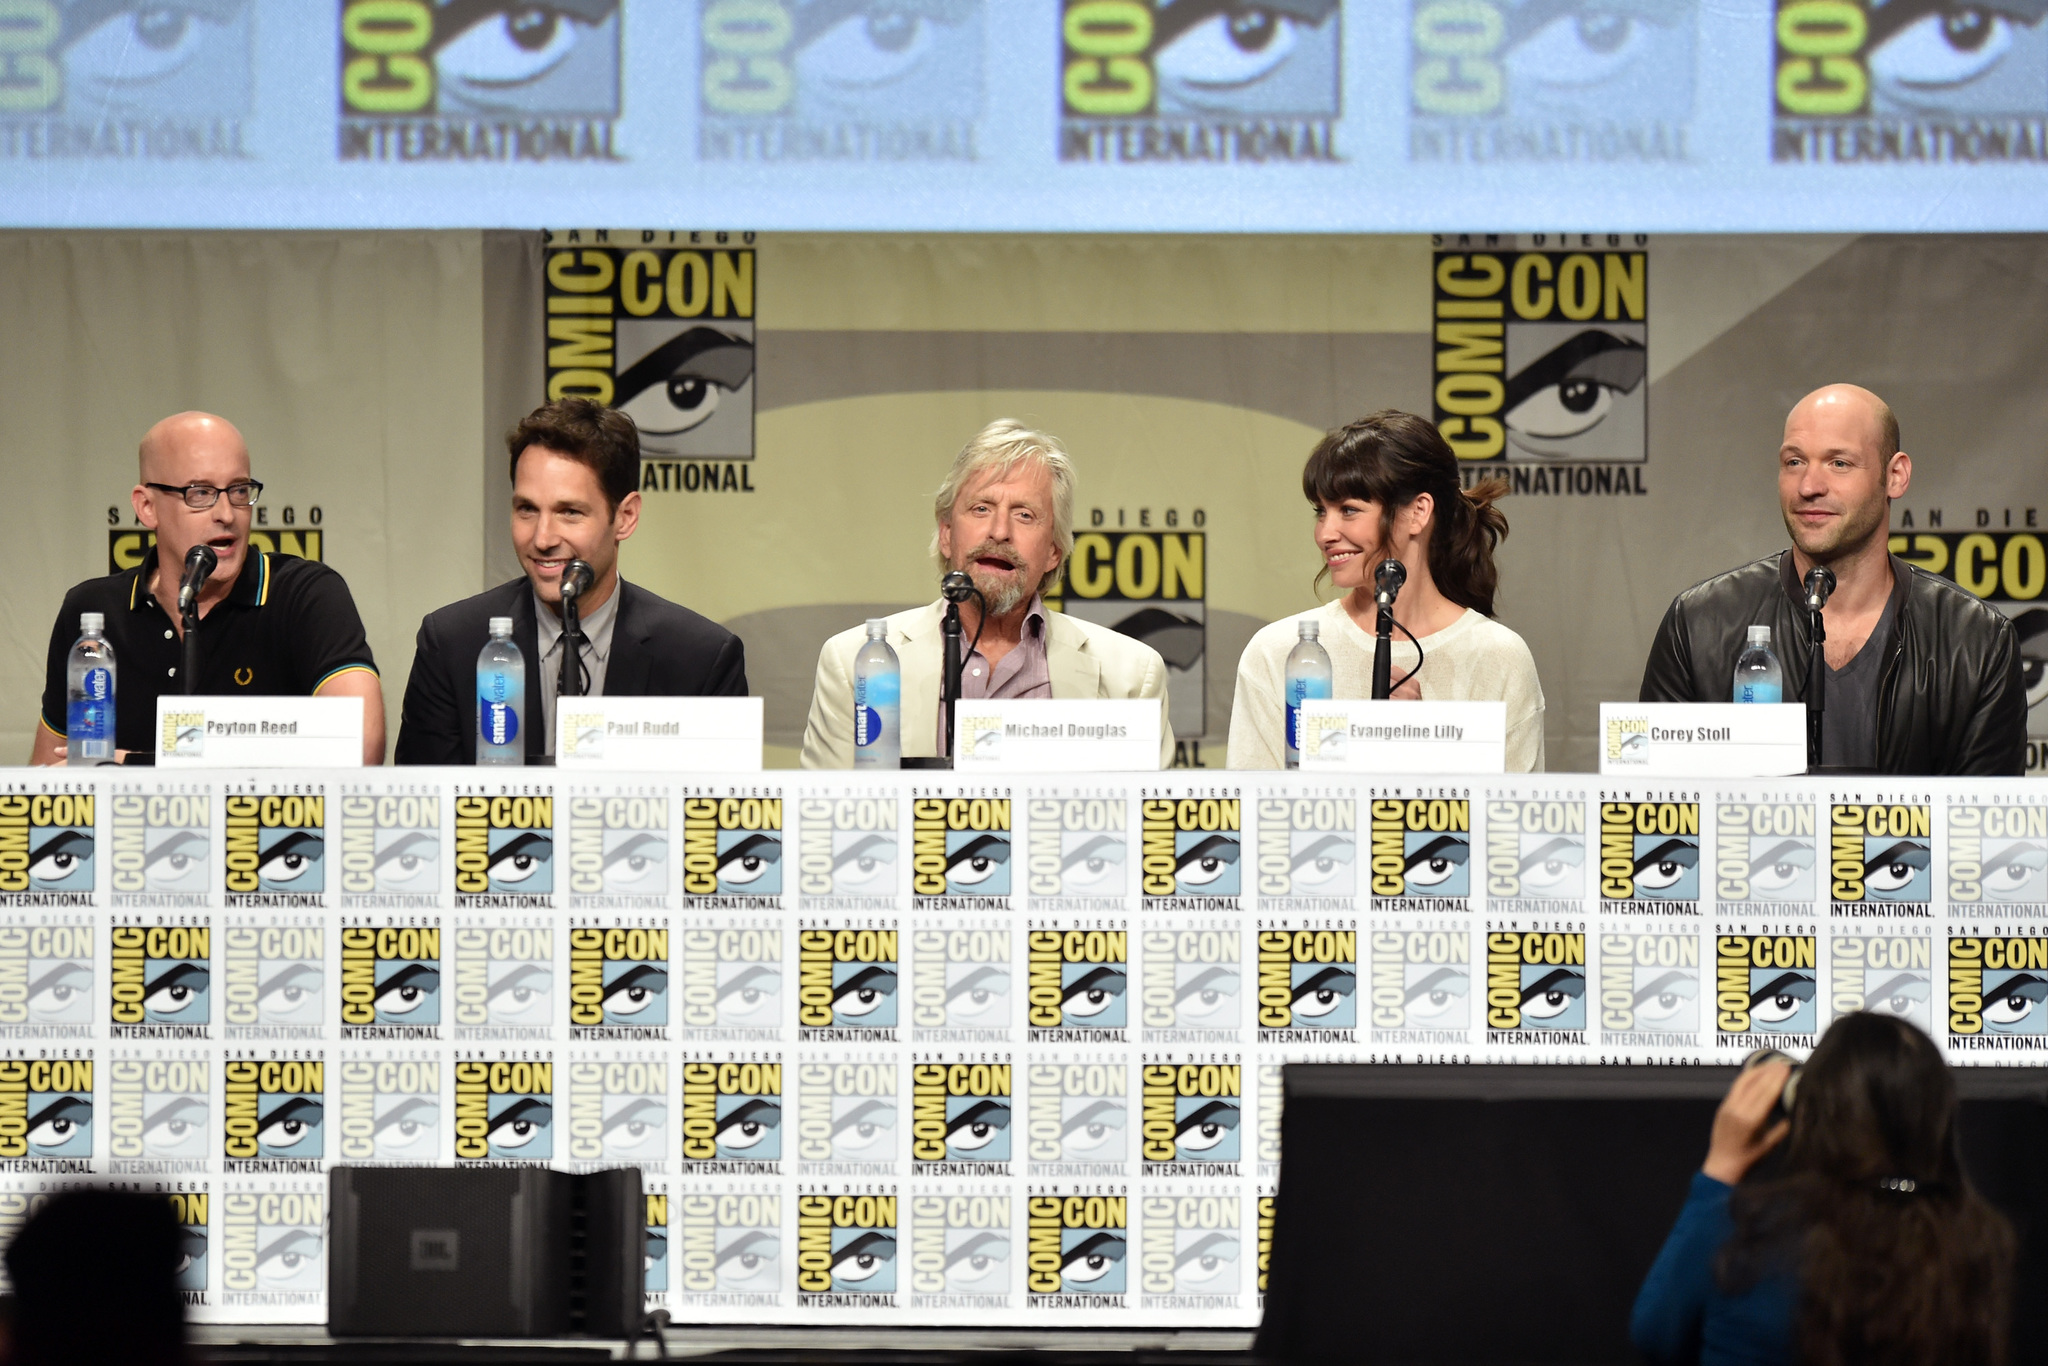 Michael Douglas, Peyton Reed, Paul Rudd, Corey Stoll, Evangeline Lilly and Kevin Winter